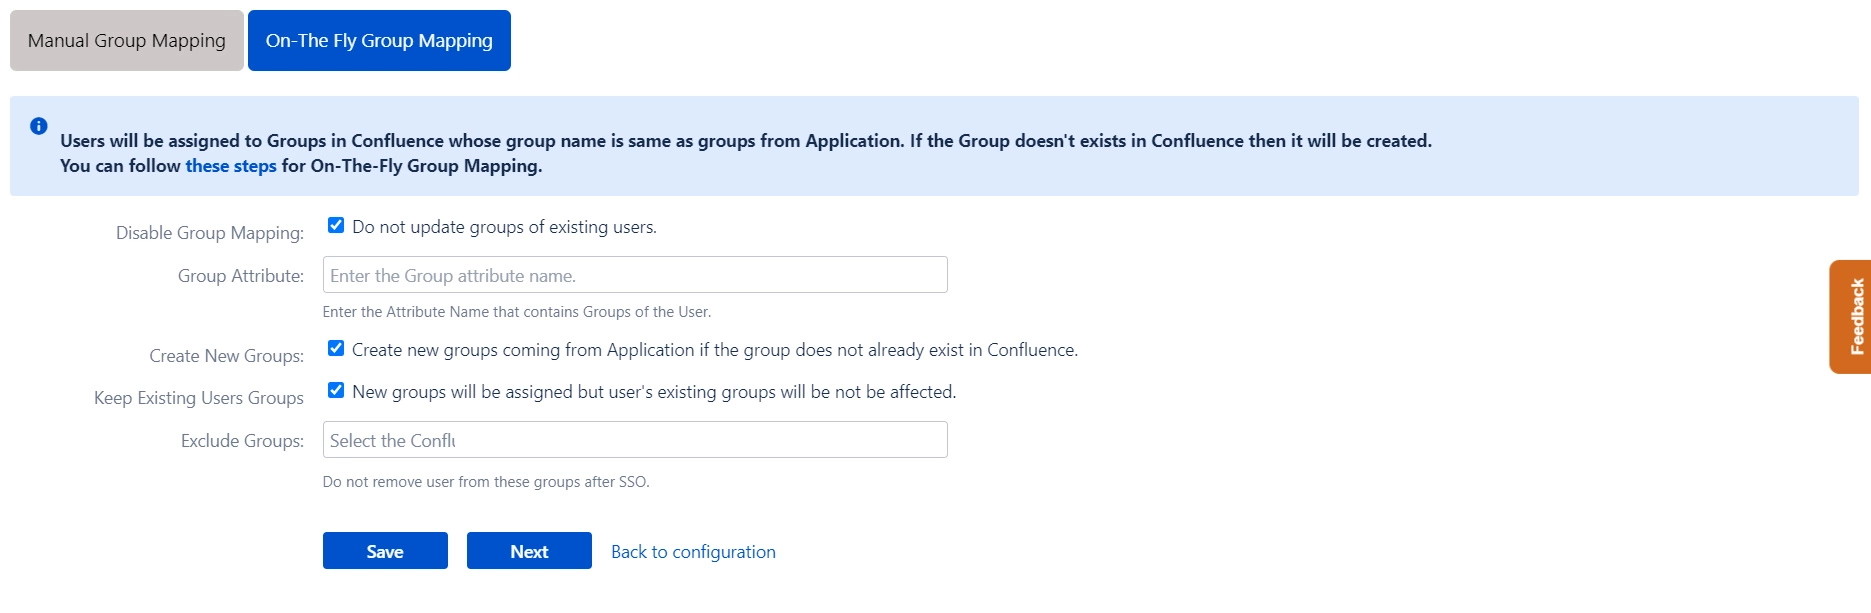 OAuth / OpenID Single Sign On (SSO) into Confluence, On the fly group mapping